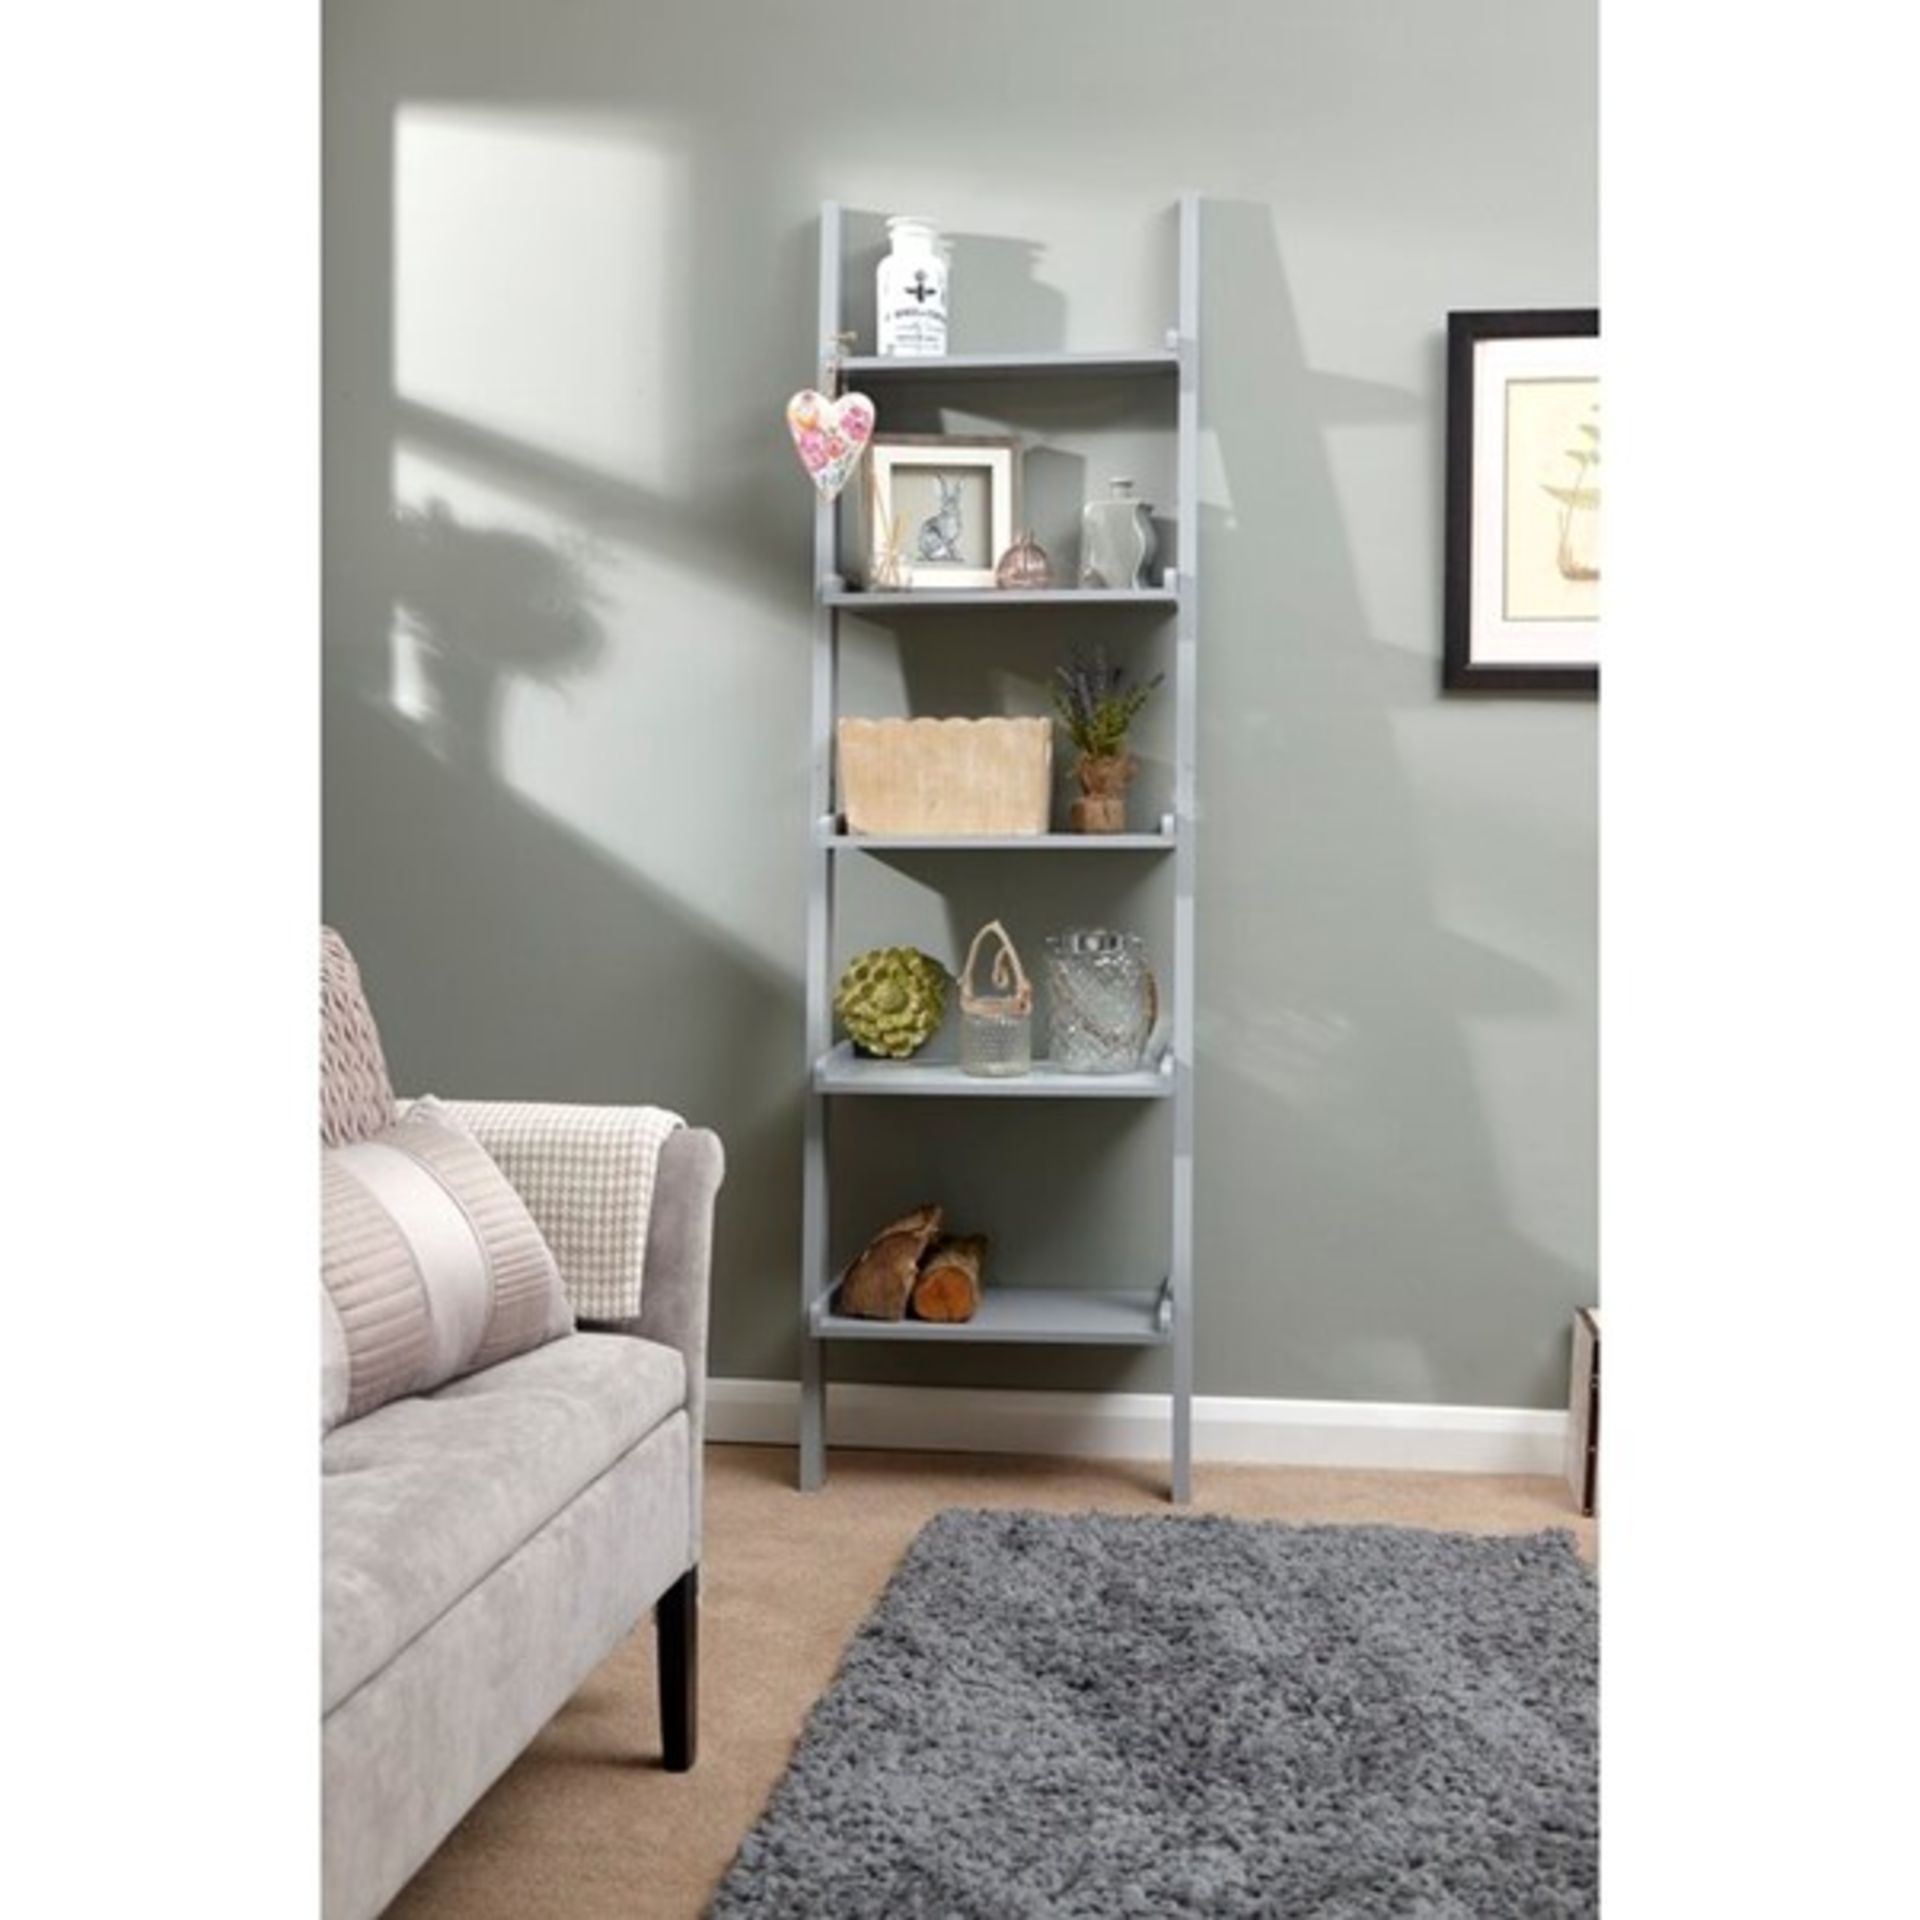 RRP £61.99 - Ira 189Cm H x 56Cm W Bookcase - 189cm H x 56cm W x 32.5cm D - Image 2 of 3